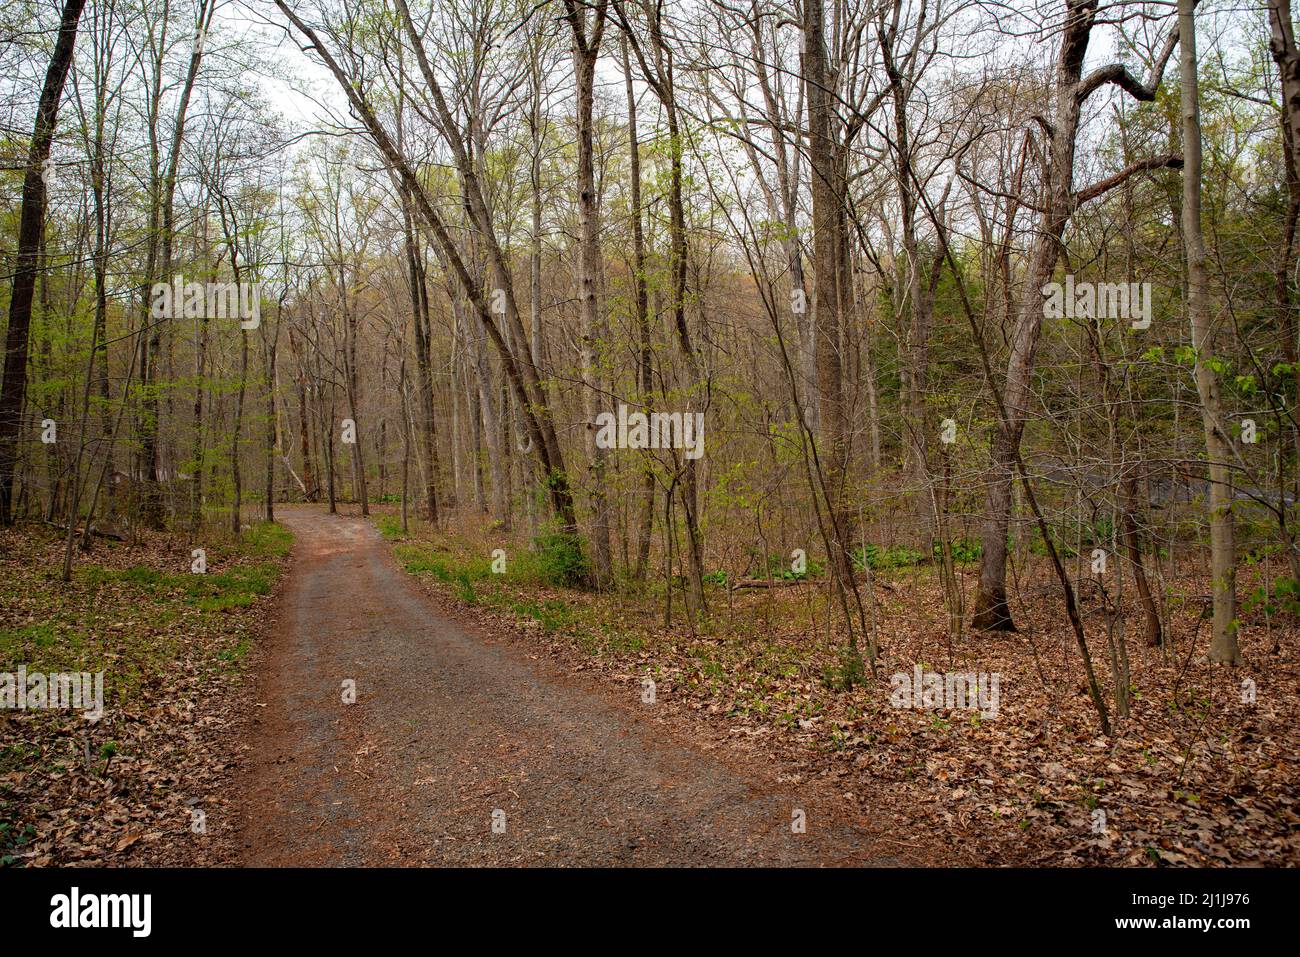 Path through an early spring woodland scene with budding trees Stock Photo